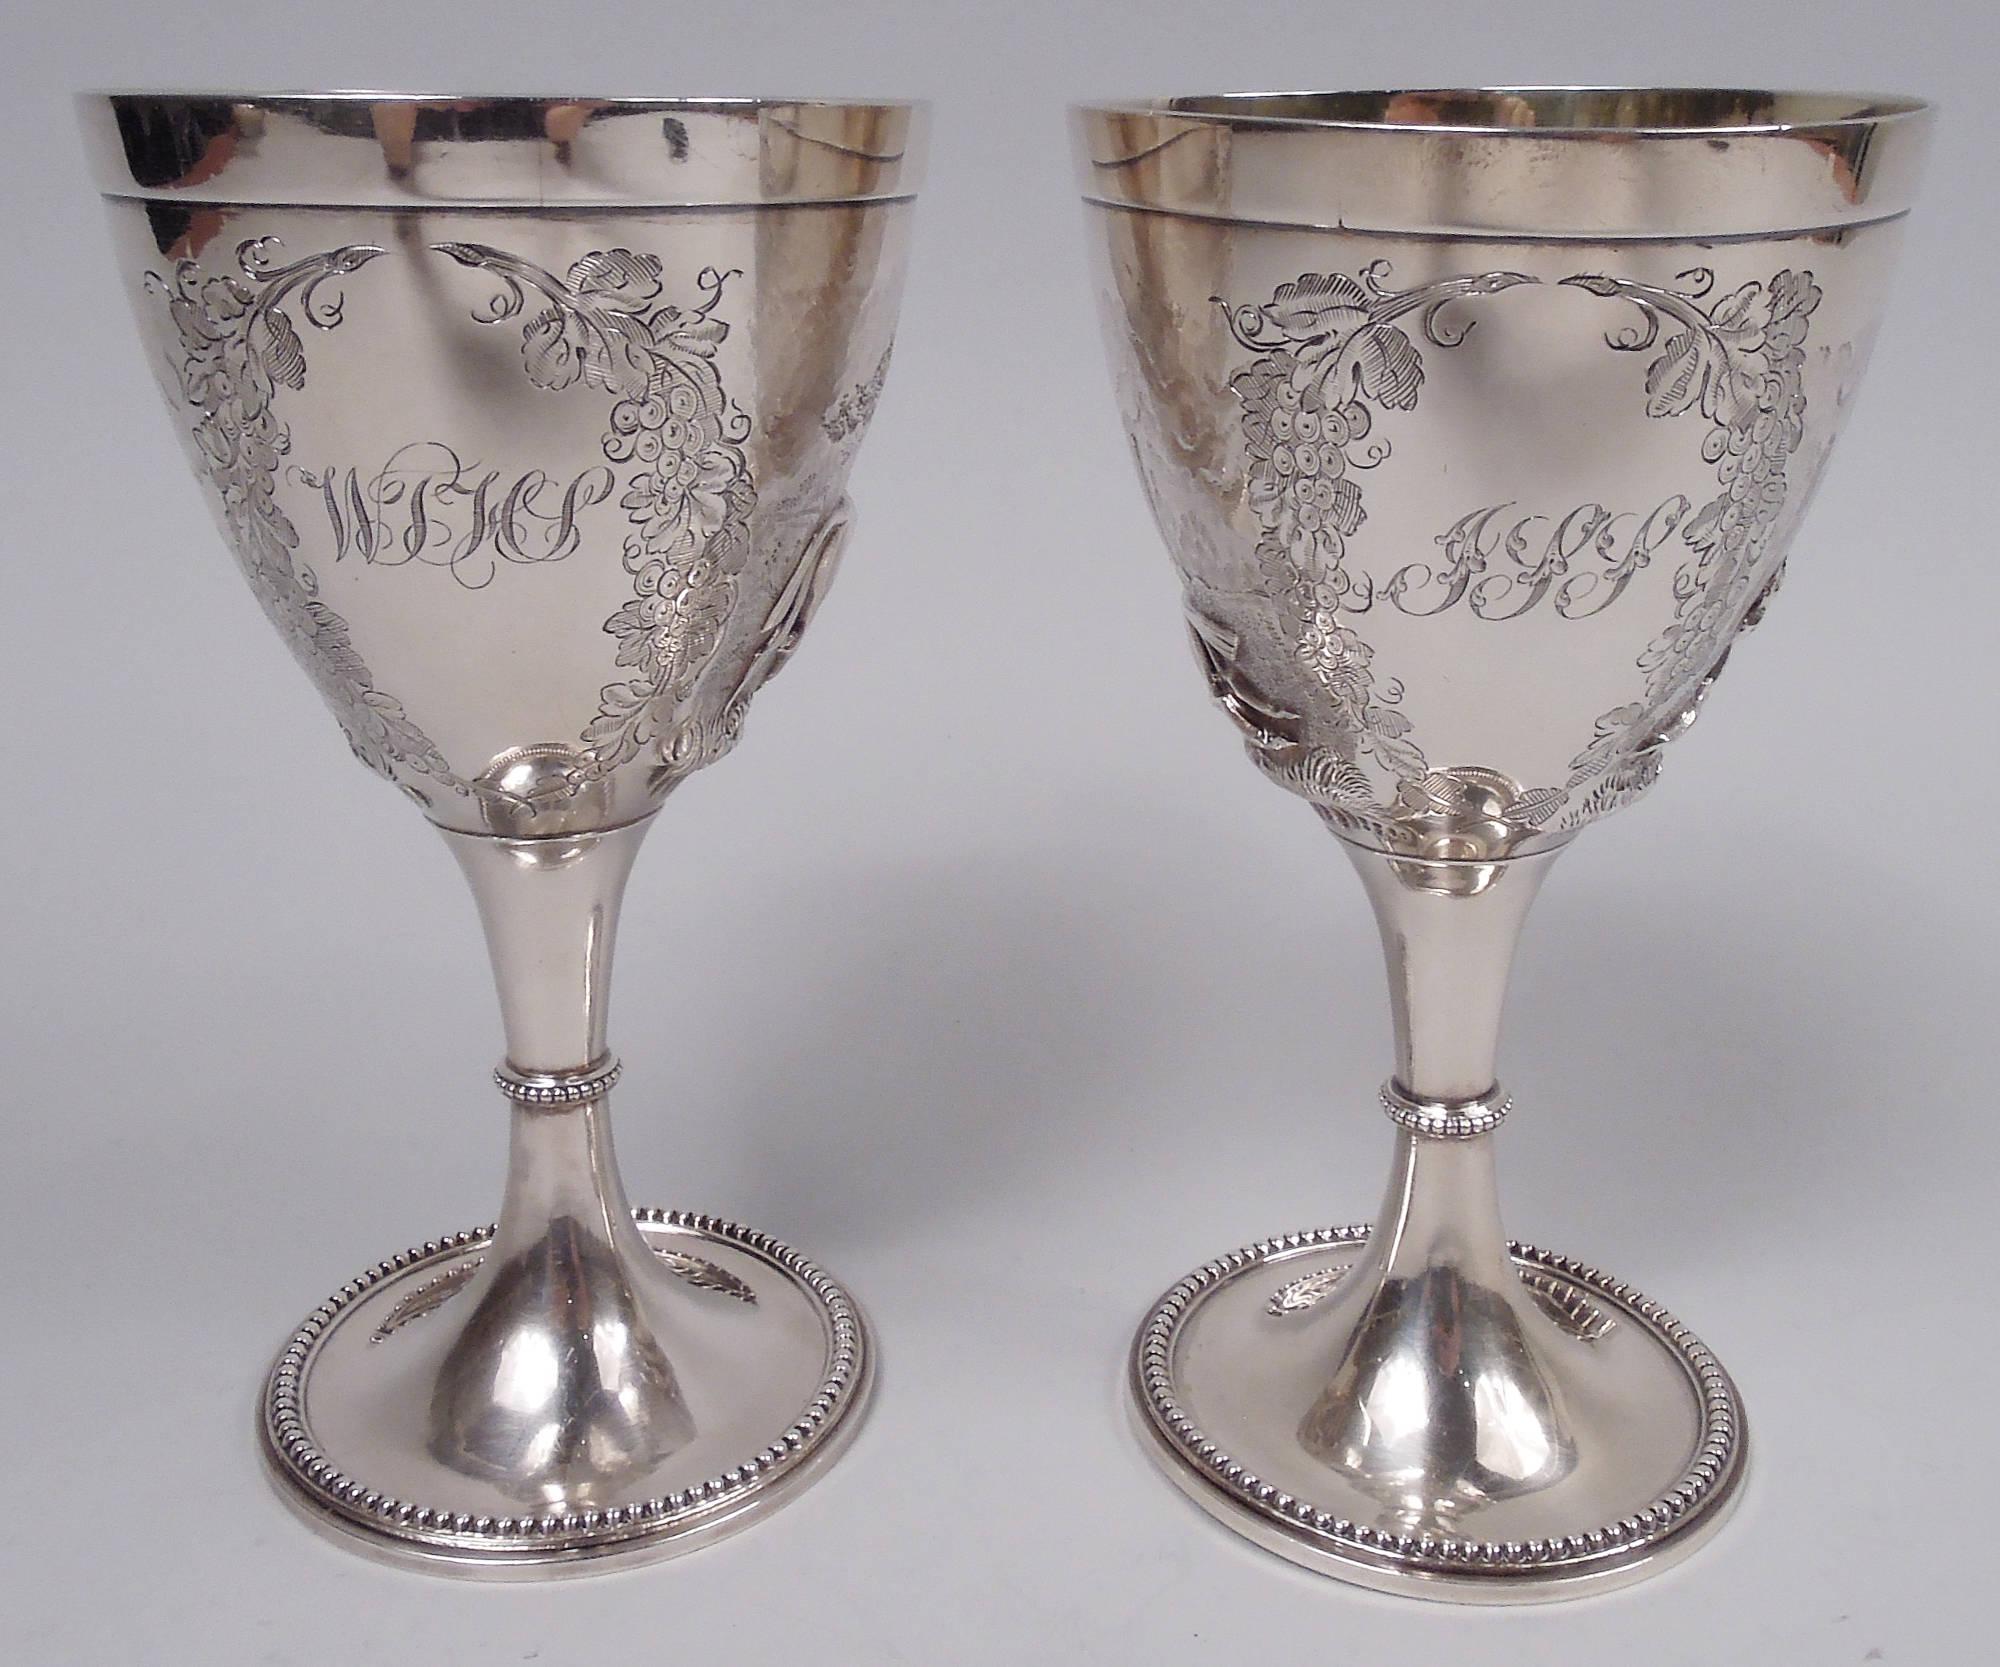 Pair of Victorian sterling silver goblets. Make by Elkington & Co. Ltd in Birmingham in 1860. Each: Ovoid bowl on knopped stem; raised foot. Chased and engraved horse scenes. On one, mounted horses amble through the countryside. On the other, it’s a